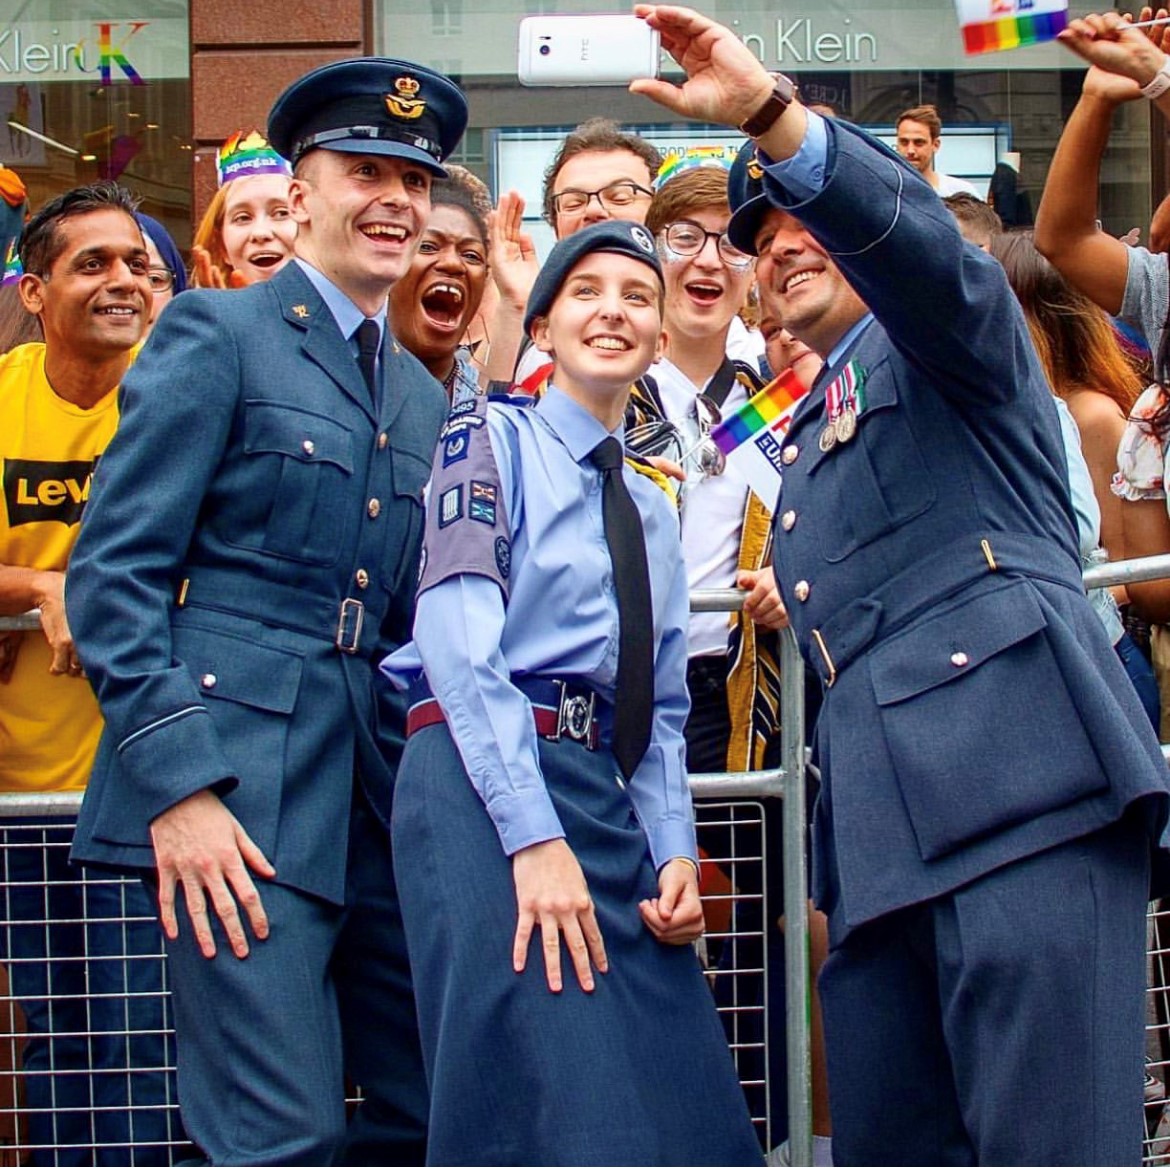 Three personnel smile as they take a selfie during a Pride March.